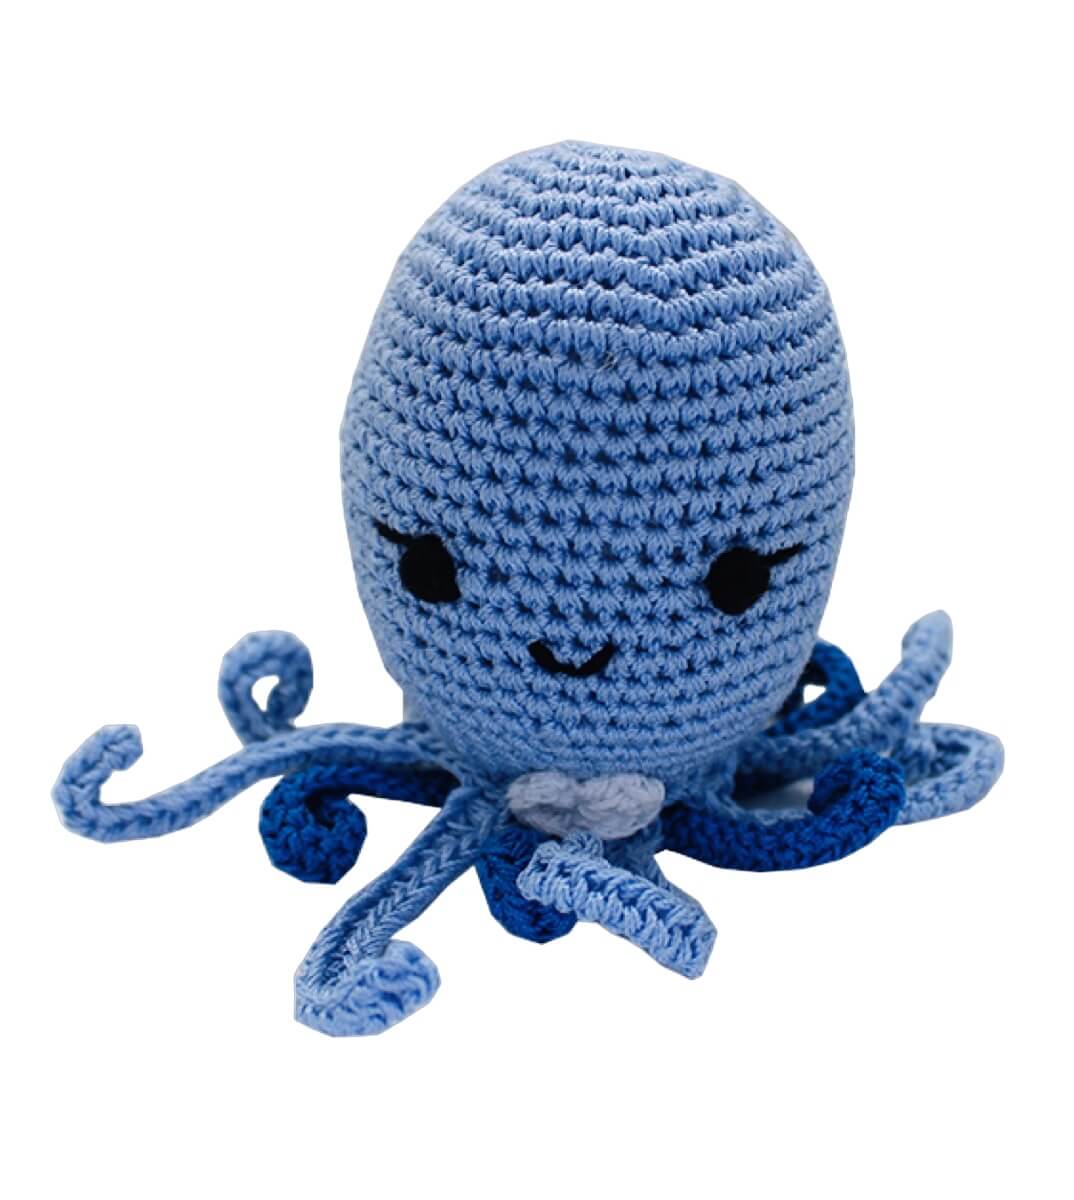 Knit Knacks "Ollie the Octopus" handmade organic cotton dog toy. Blue anthropomorphic octopus with a happy expression and a smiling face.